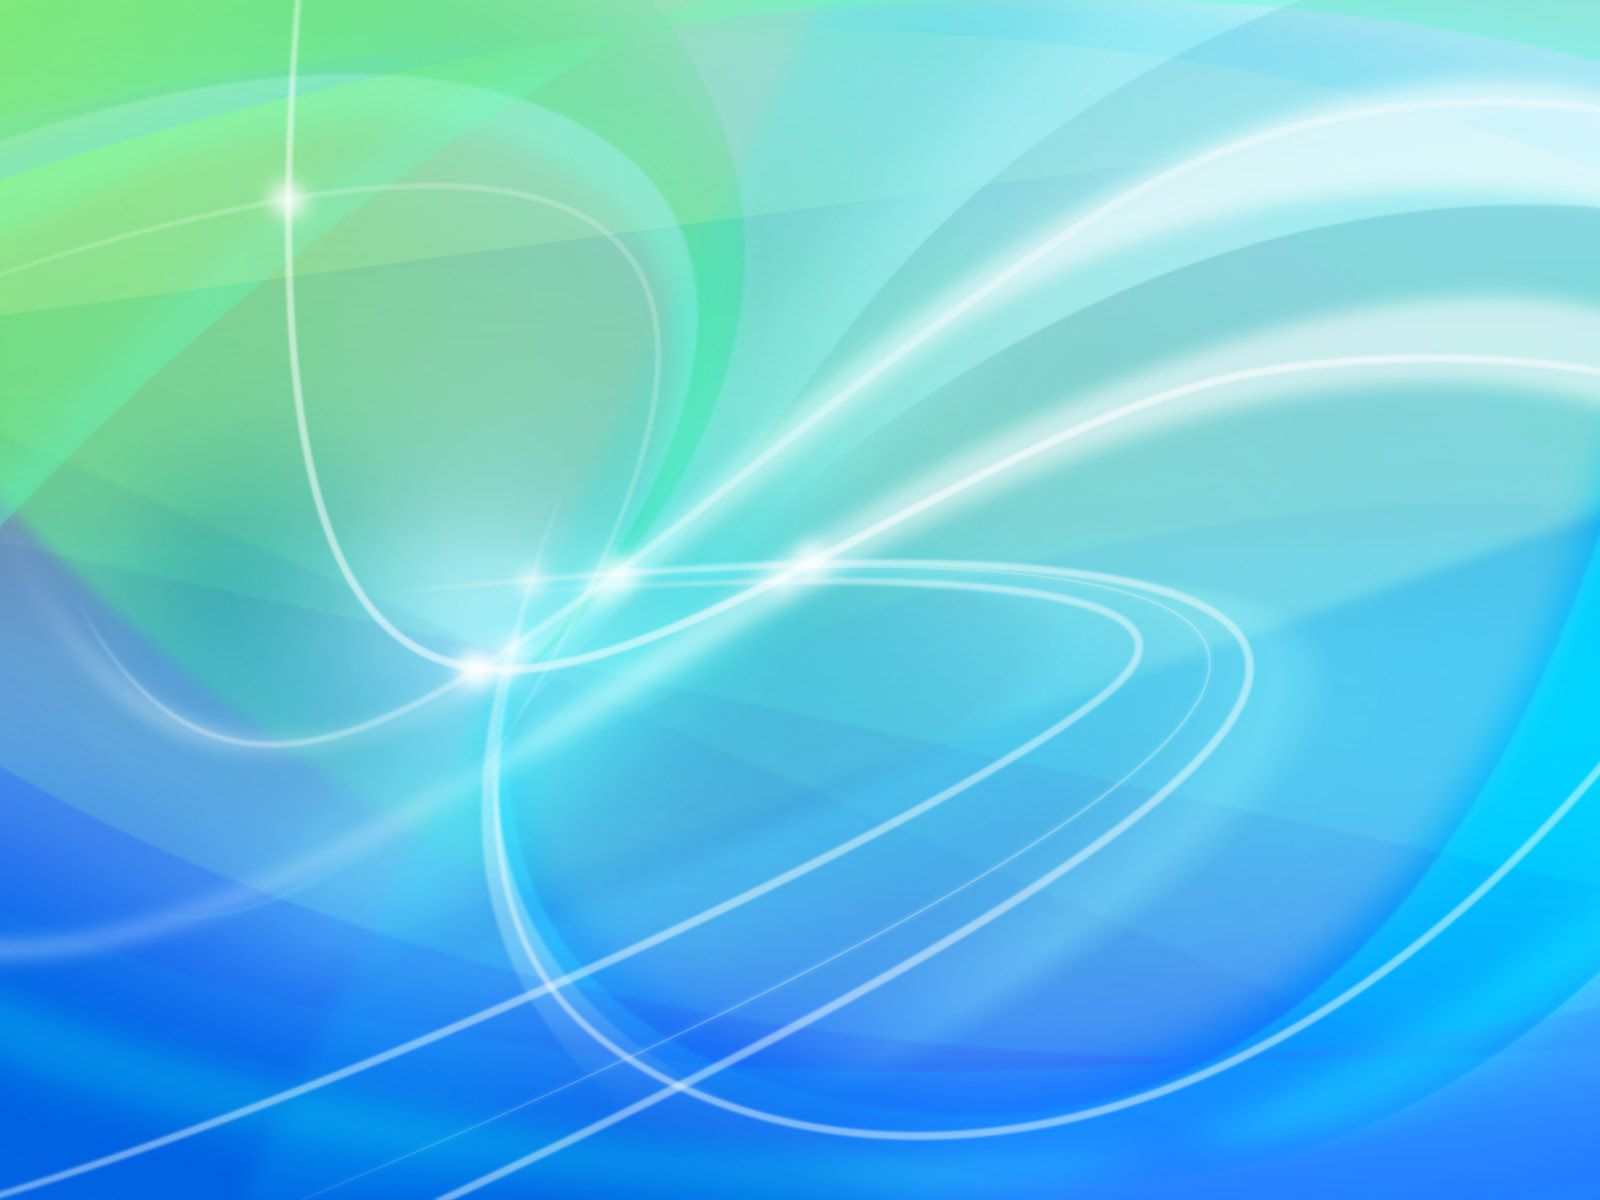 Electronic Spin wallpaper. Electronic Spin